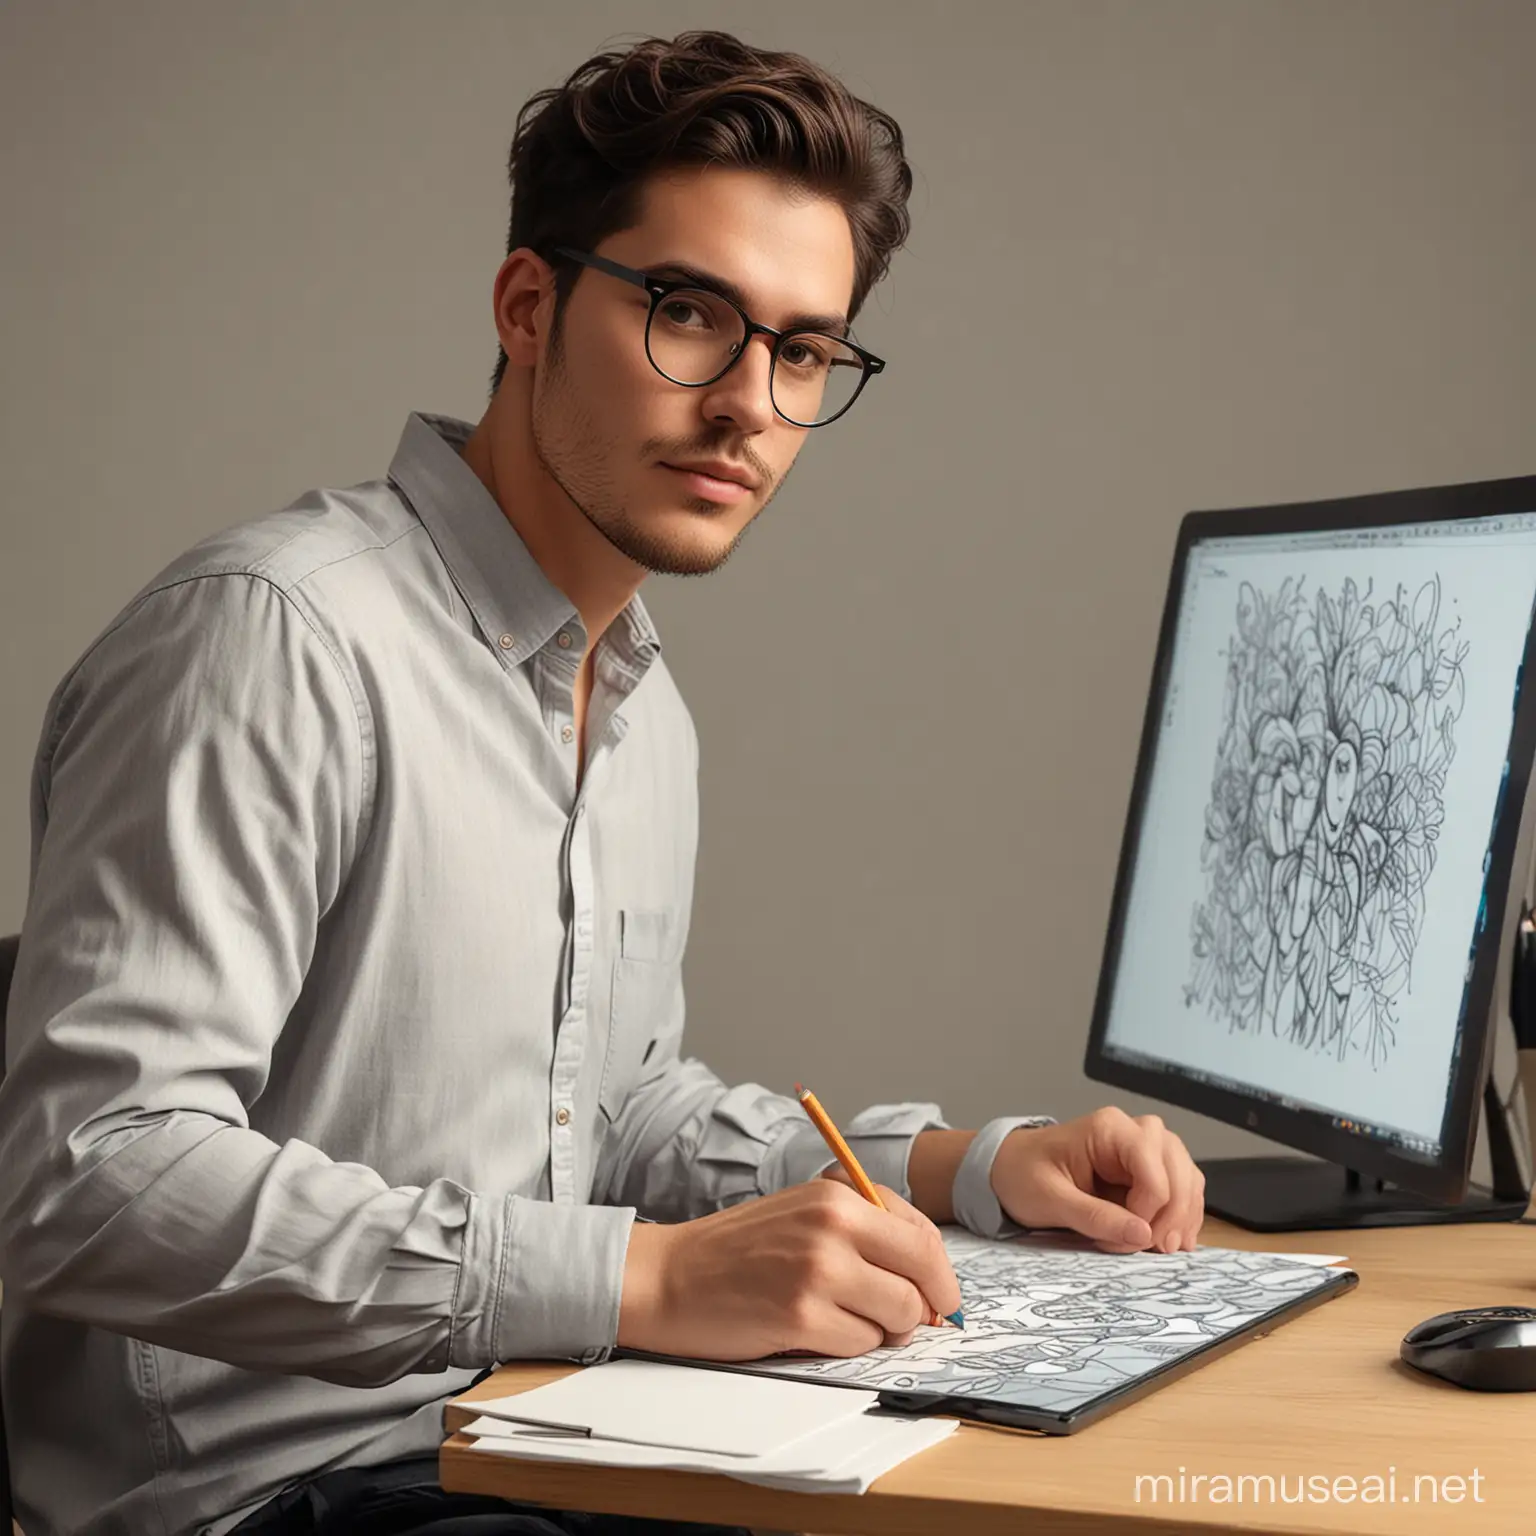 Male Digital Artist with Digital Art Pencil and Tablet